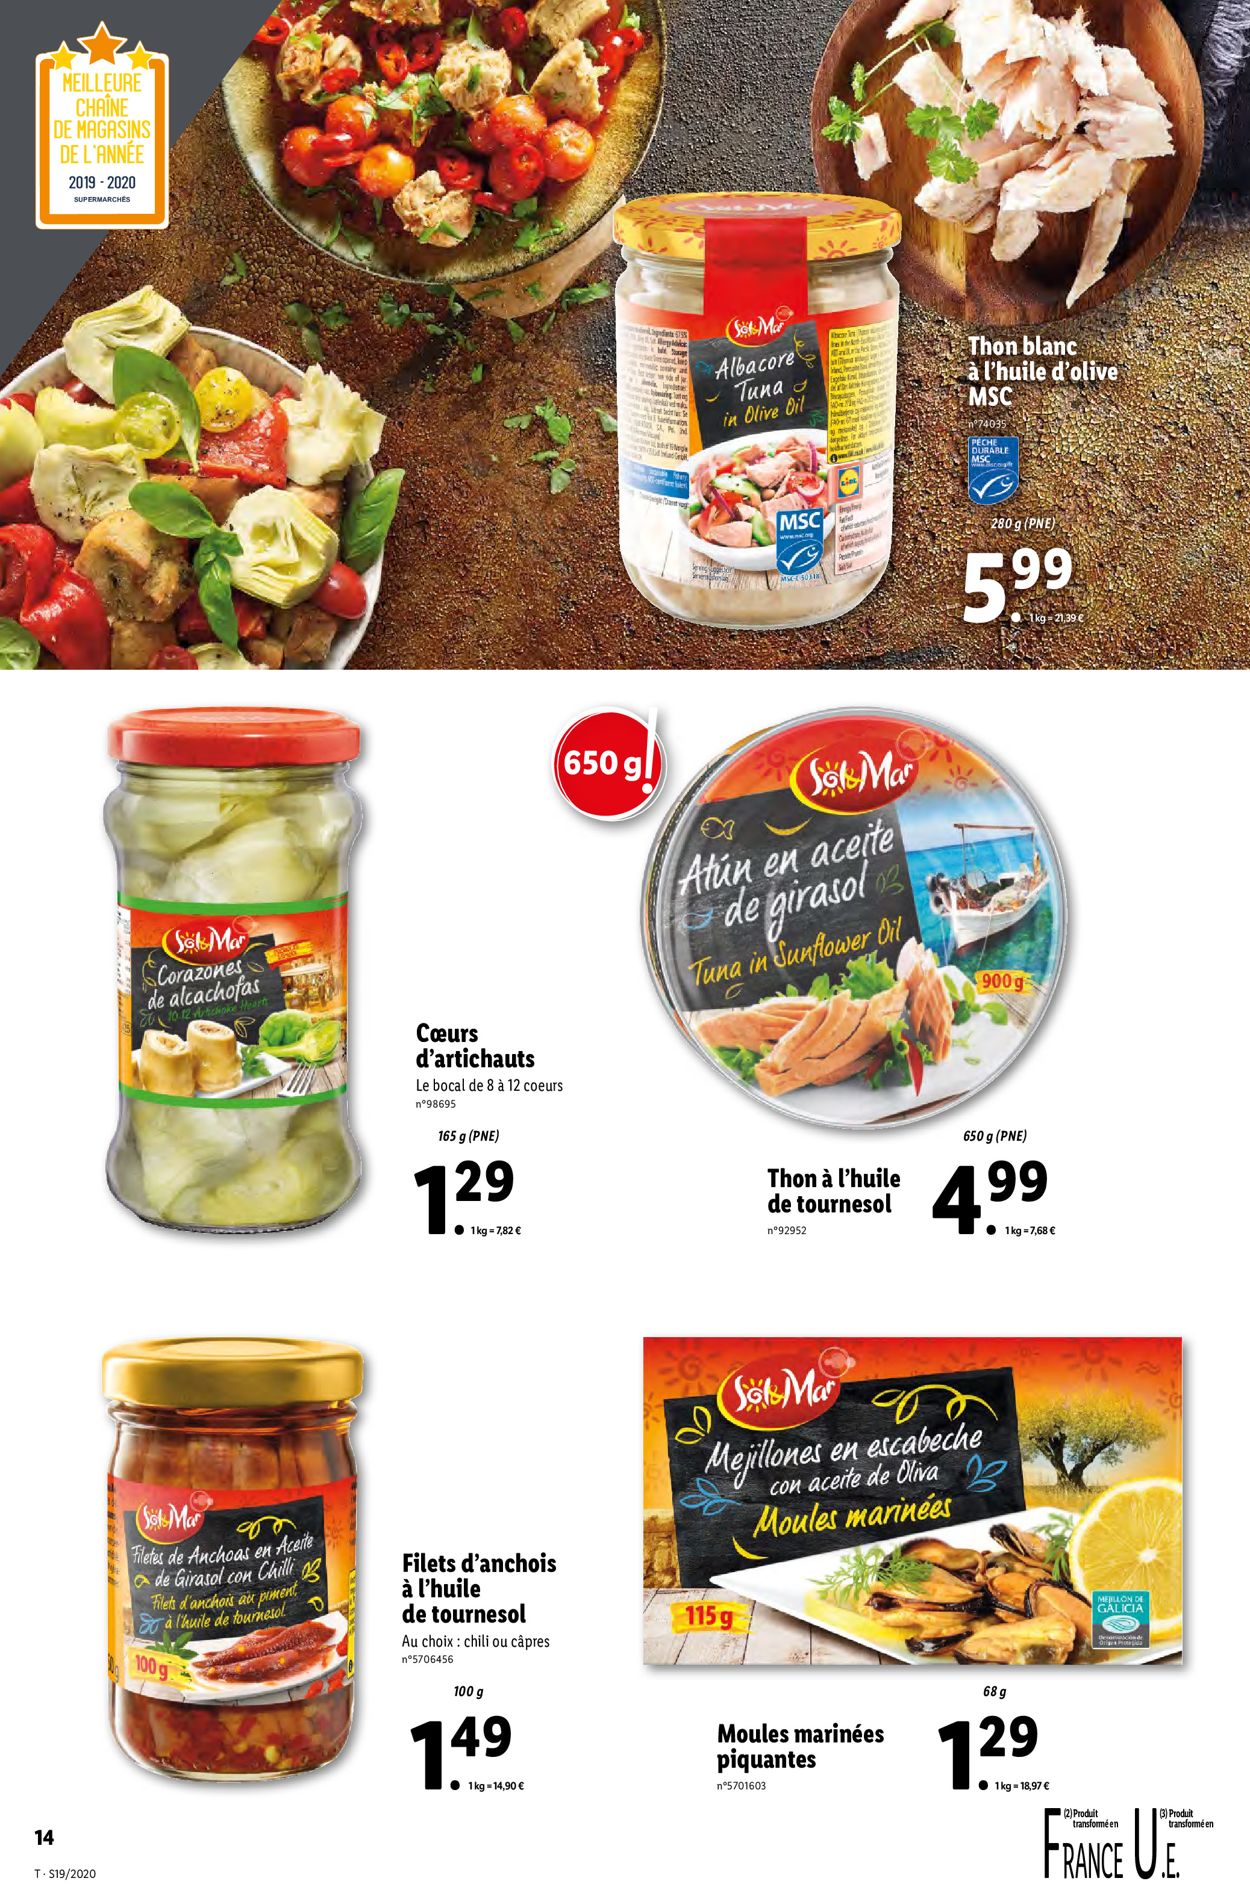 Lidl Catalogue - 06.05-12.05.2020 (Page 14)